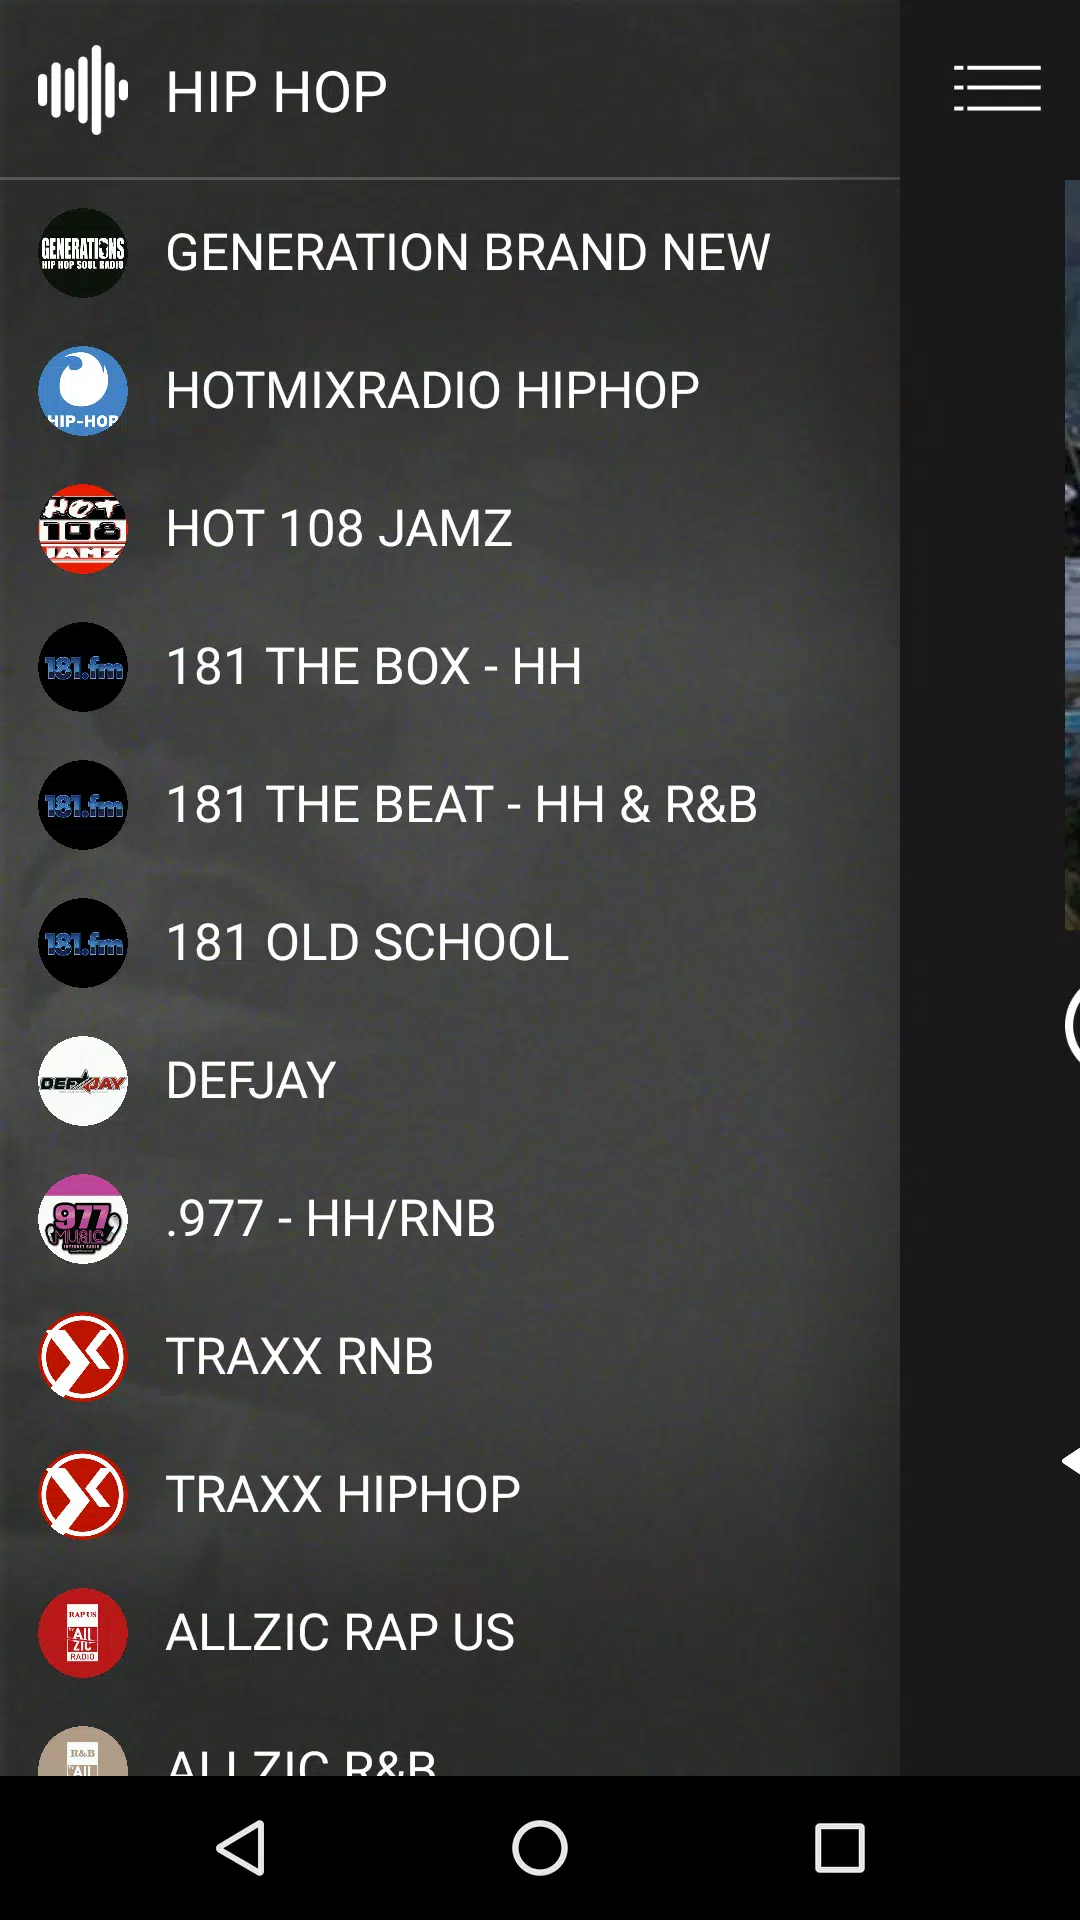 HIPHOP RAP R&B RADIO for Android - APK Download